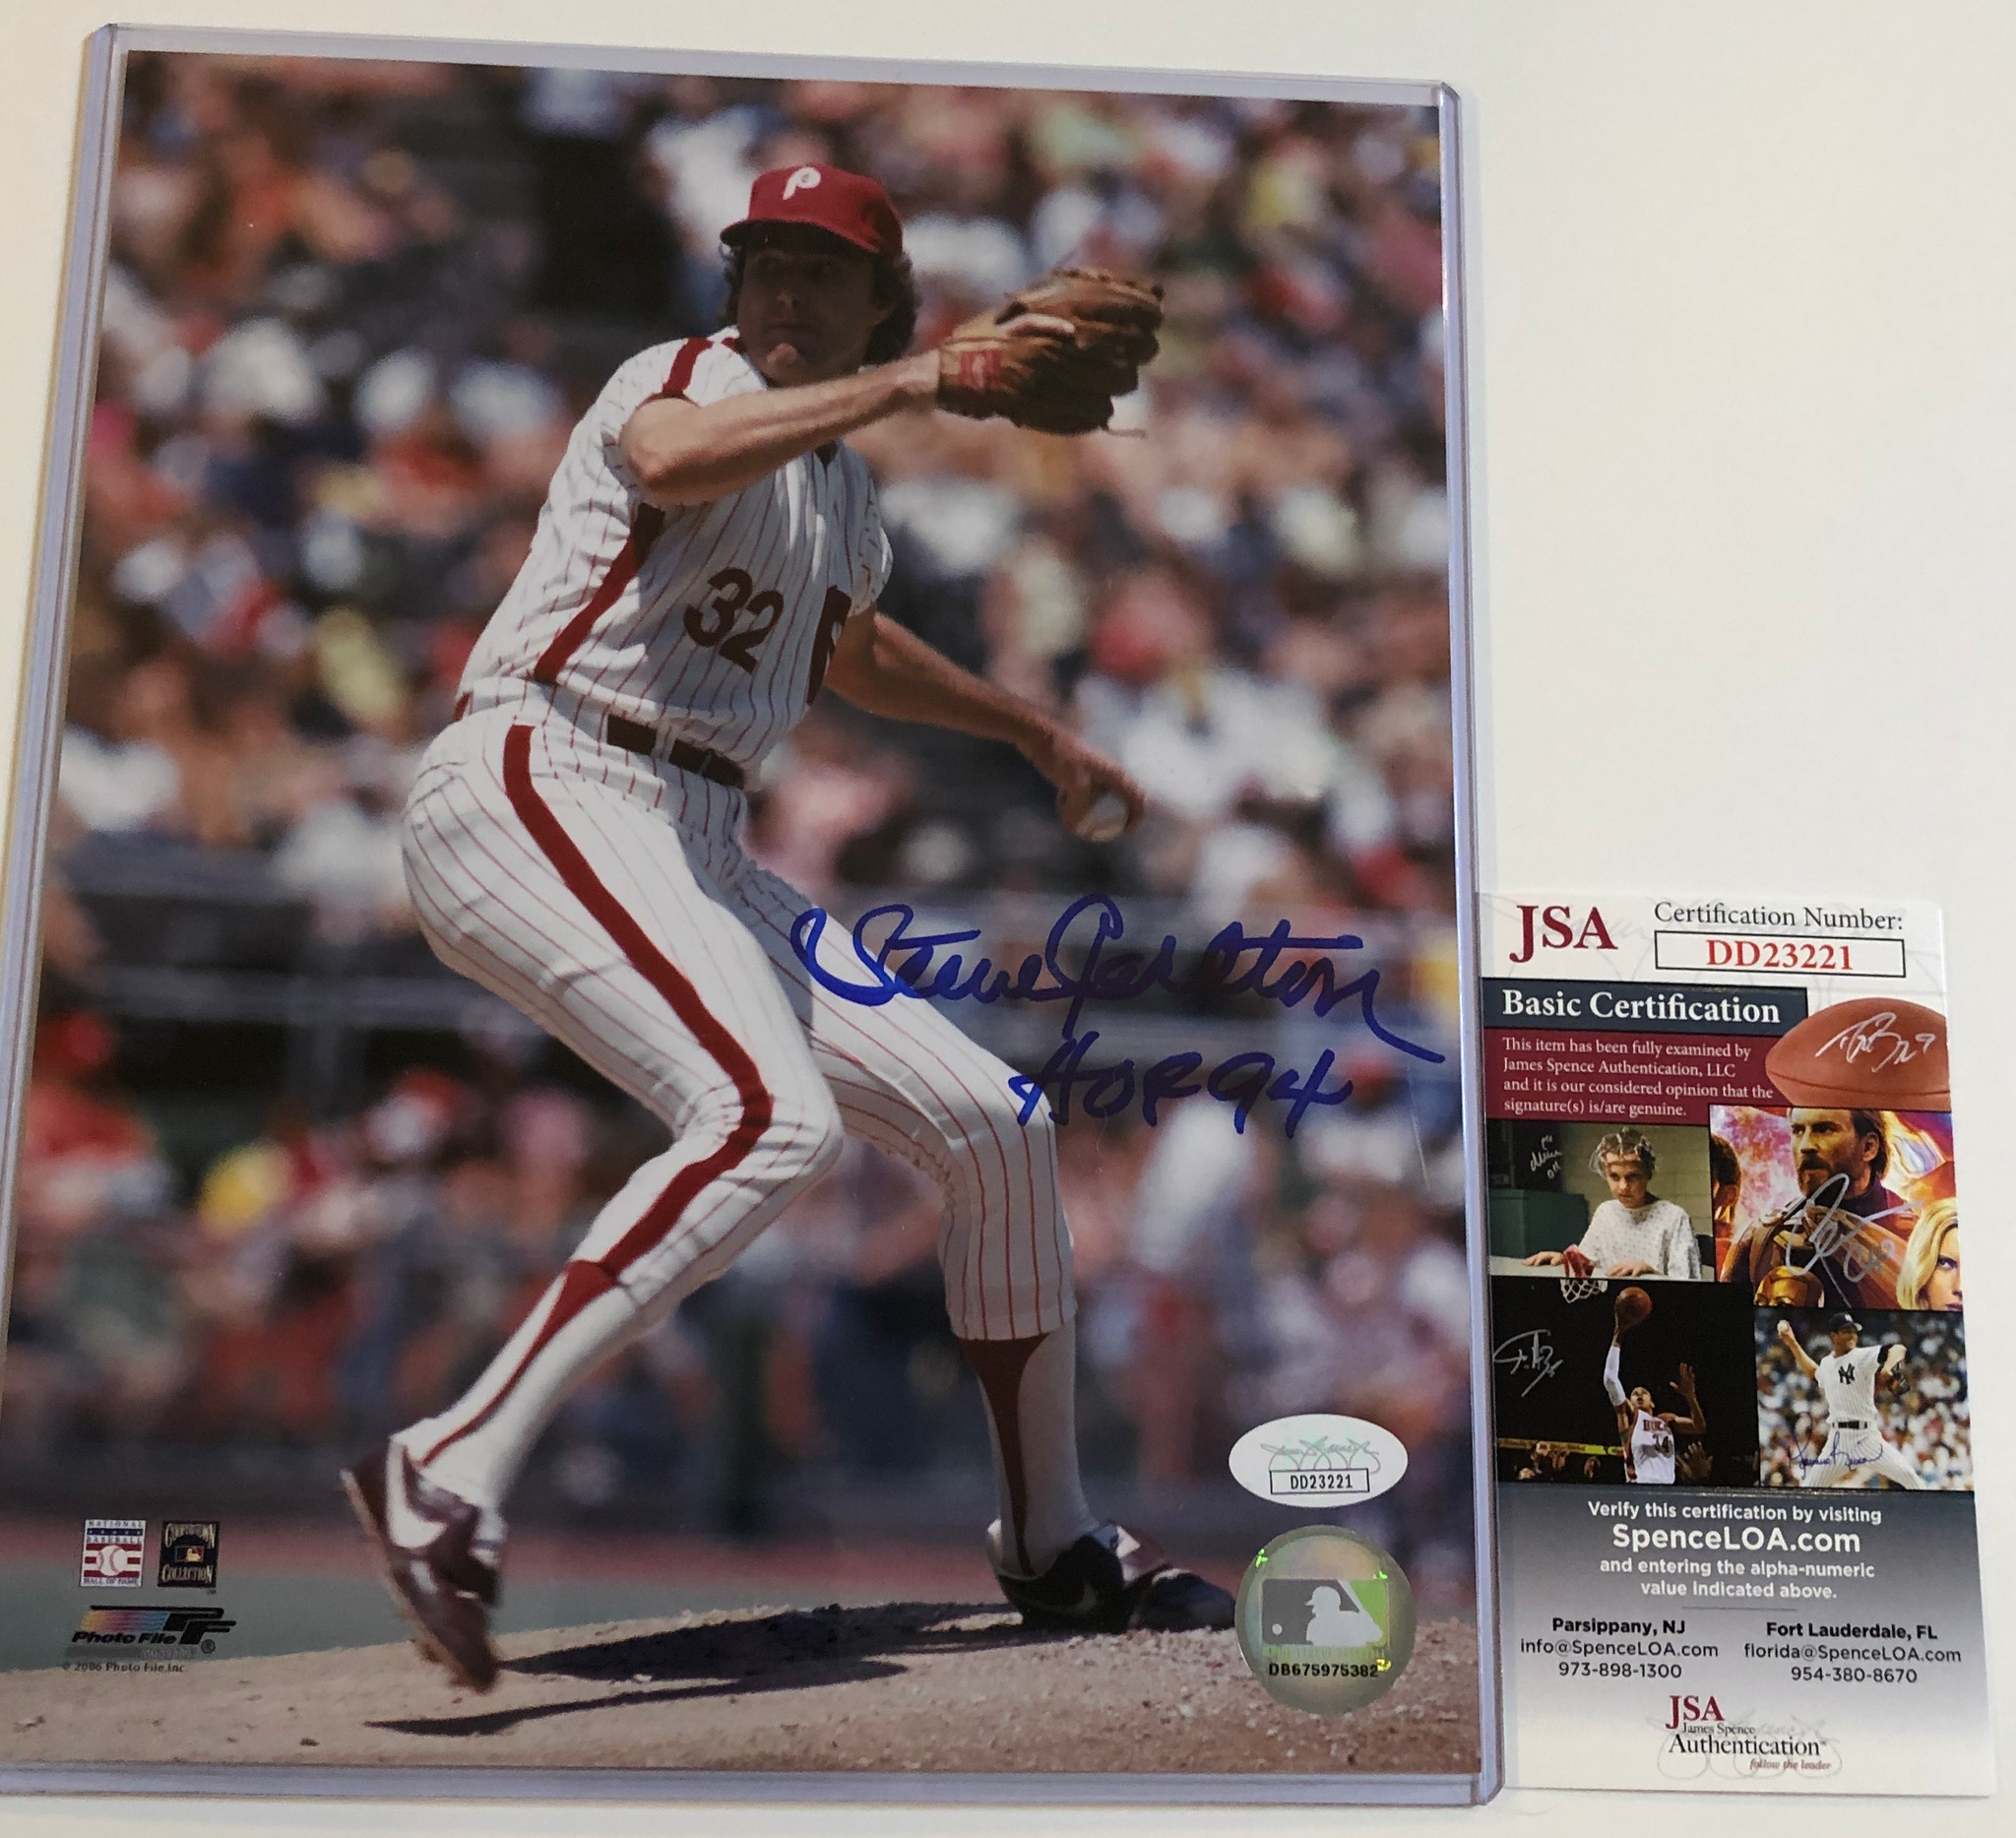 Signed Steve Carlton Picture - 8X10